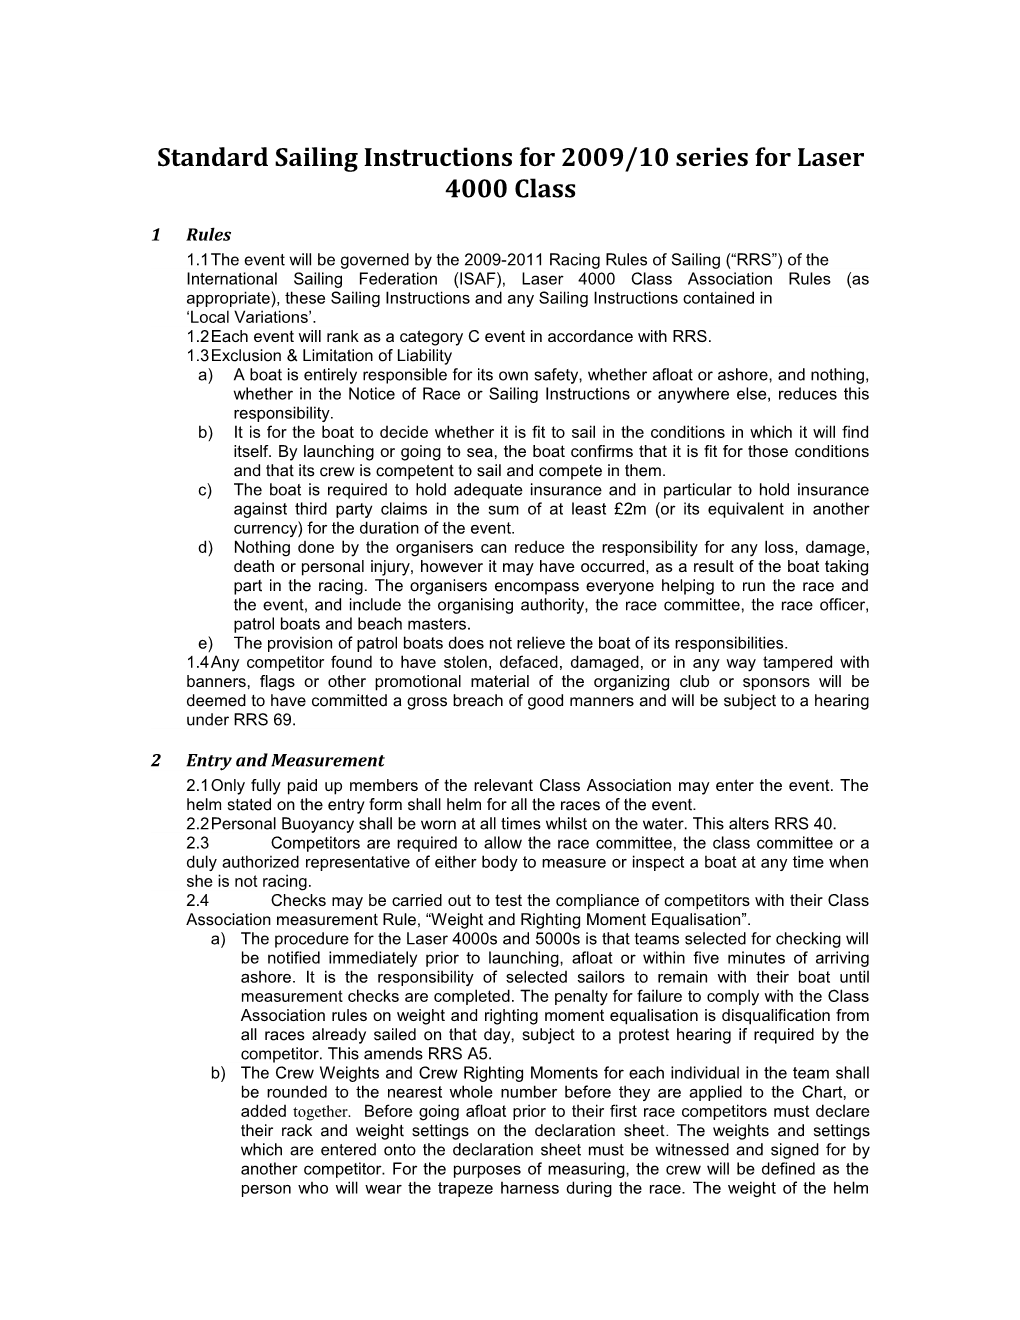 Standard Sailing Instructions for All 2009 Series for Laser 4000 & 5000